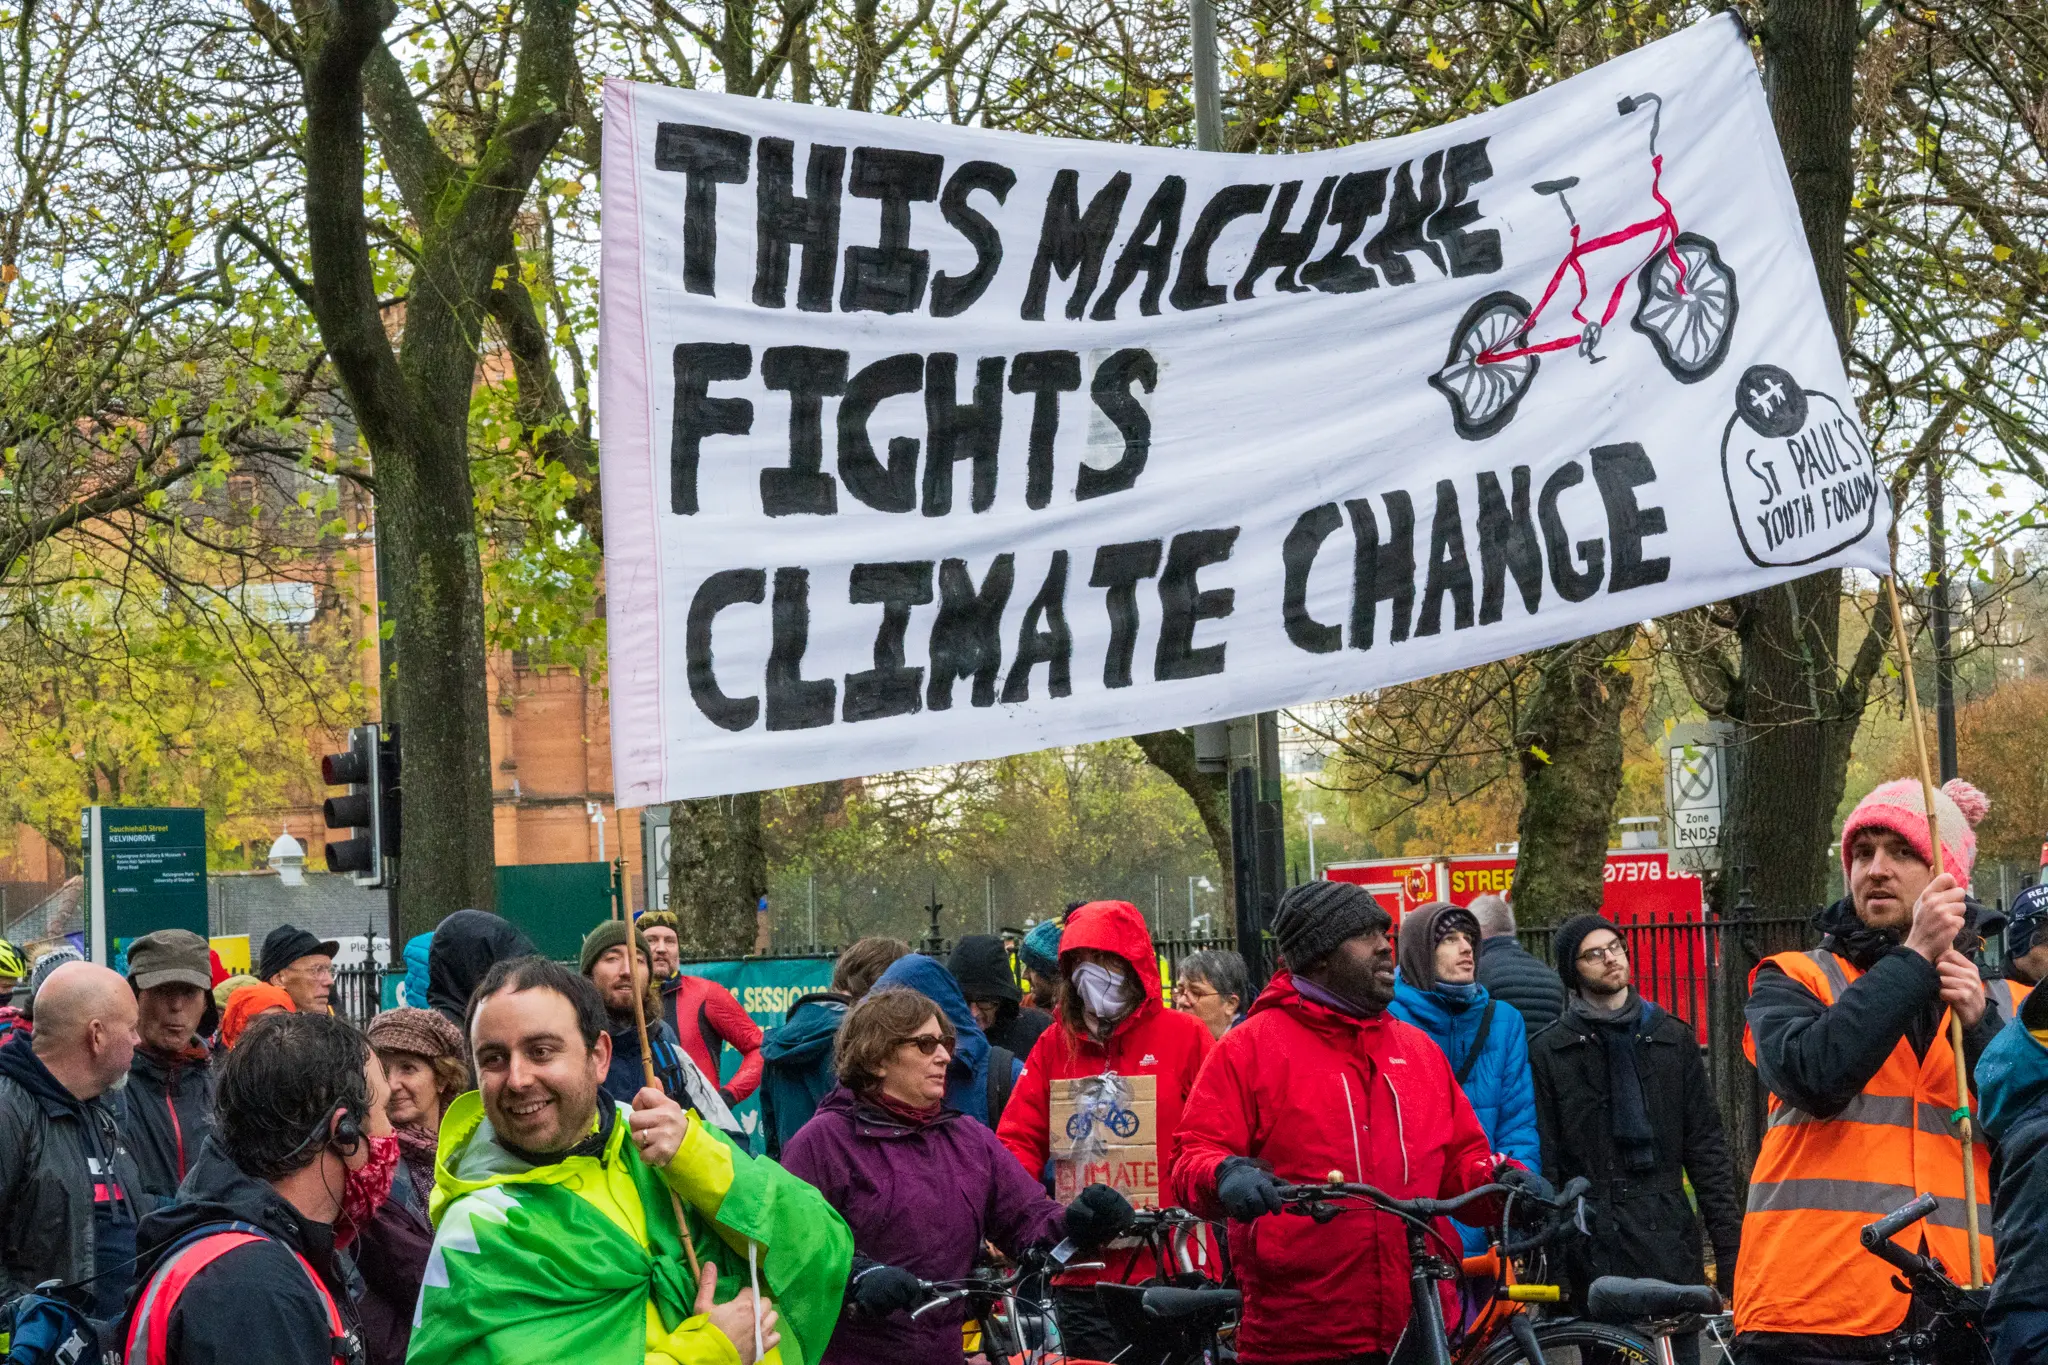 sign reads "This Machine Fights Climate Change"